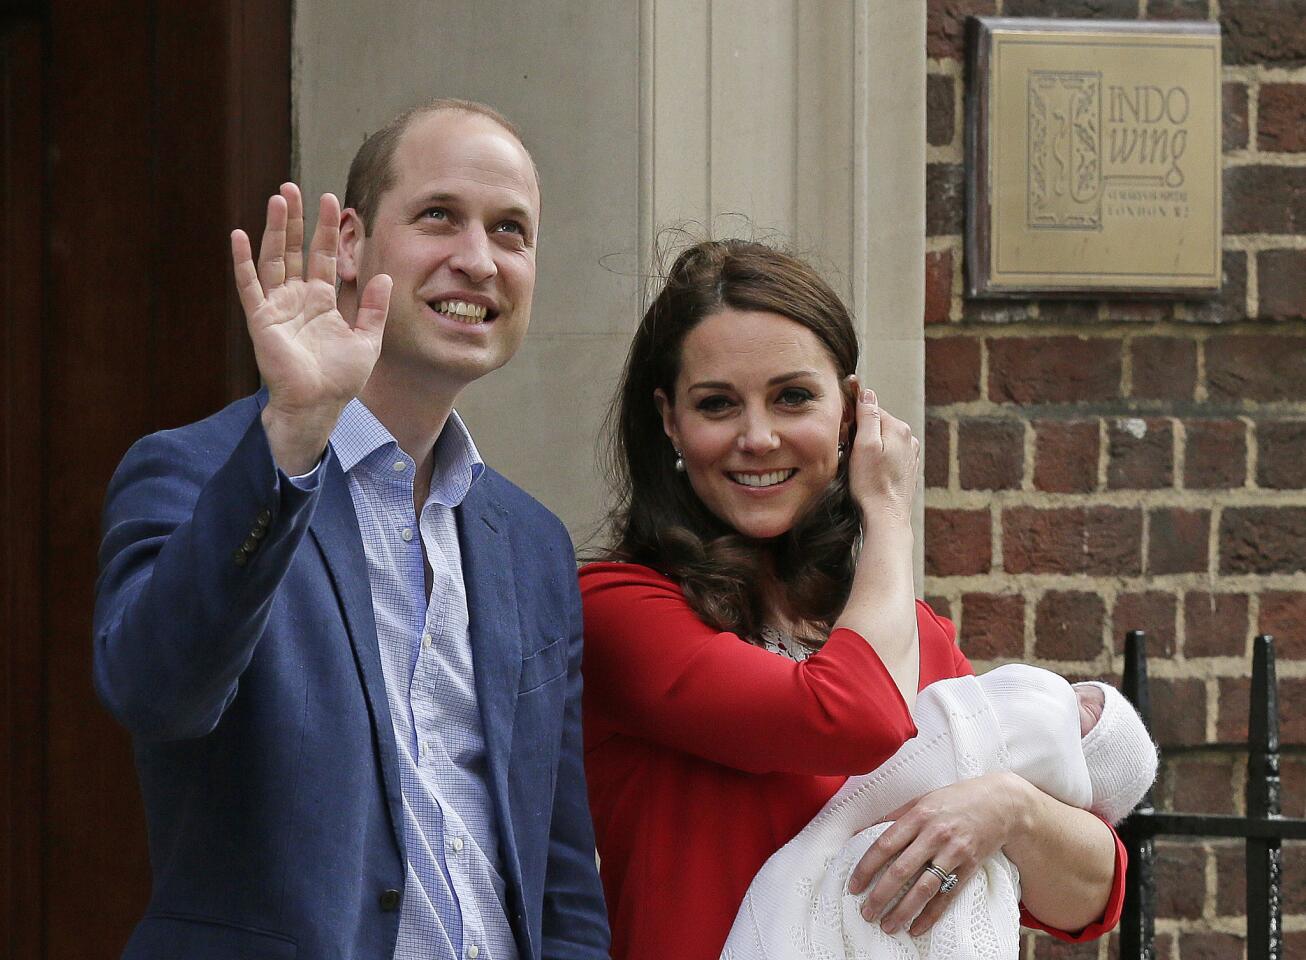 Britain's Prince William and Kate, Duchess of Cambridge wave as they hold their newborn baby son as they leave the Lindo wing at St Mary's Hospital in London London, Monday, April 23, 2018.